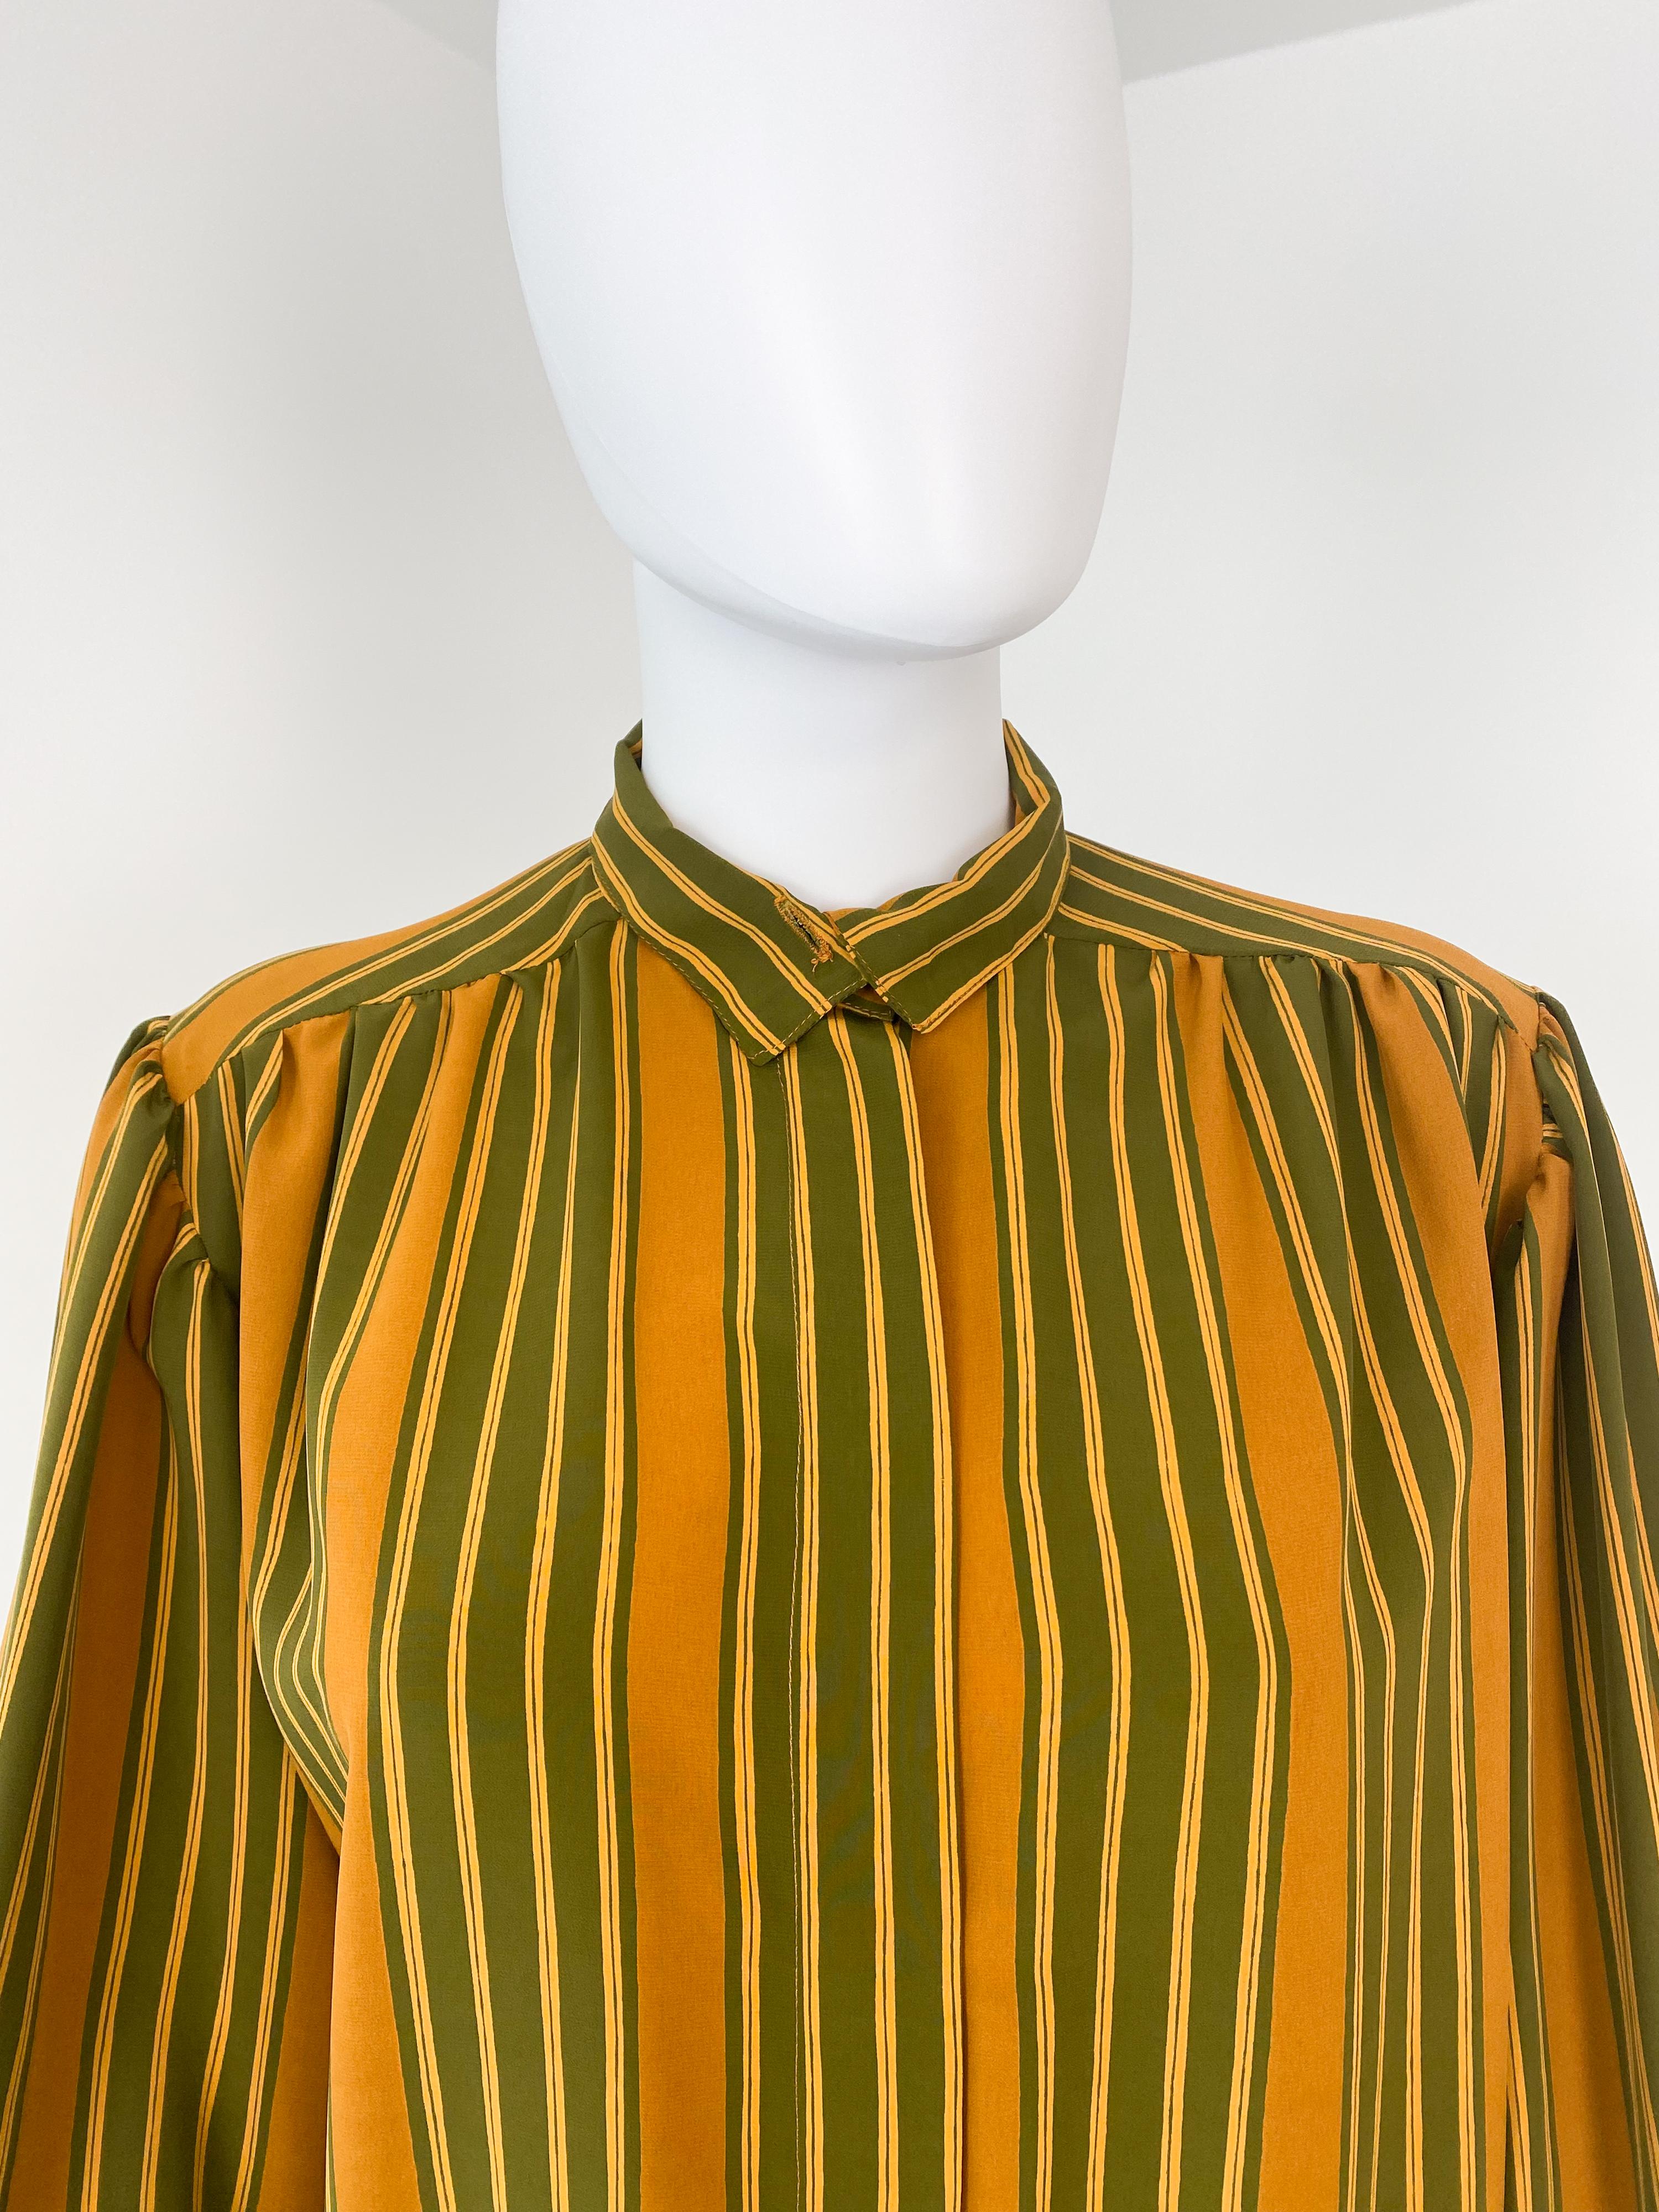 Vintage 1980s Silky Polyester Blouse Top Green and Saffran Stripes Size 10/12 For Sale 3